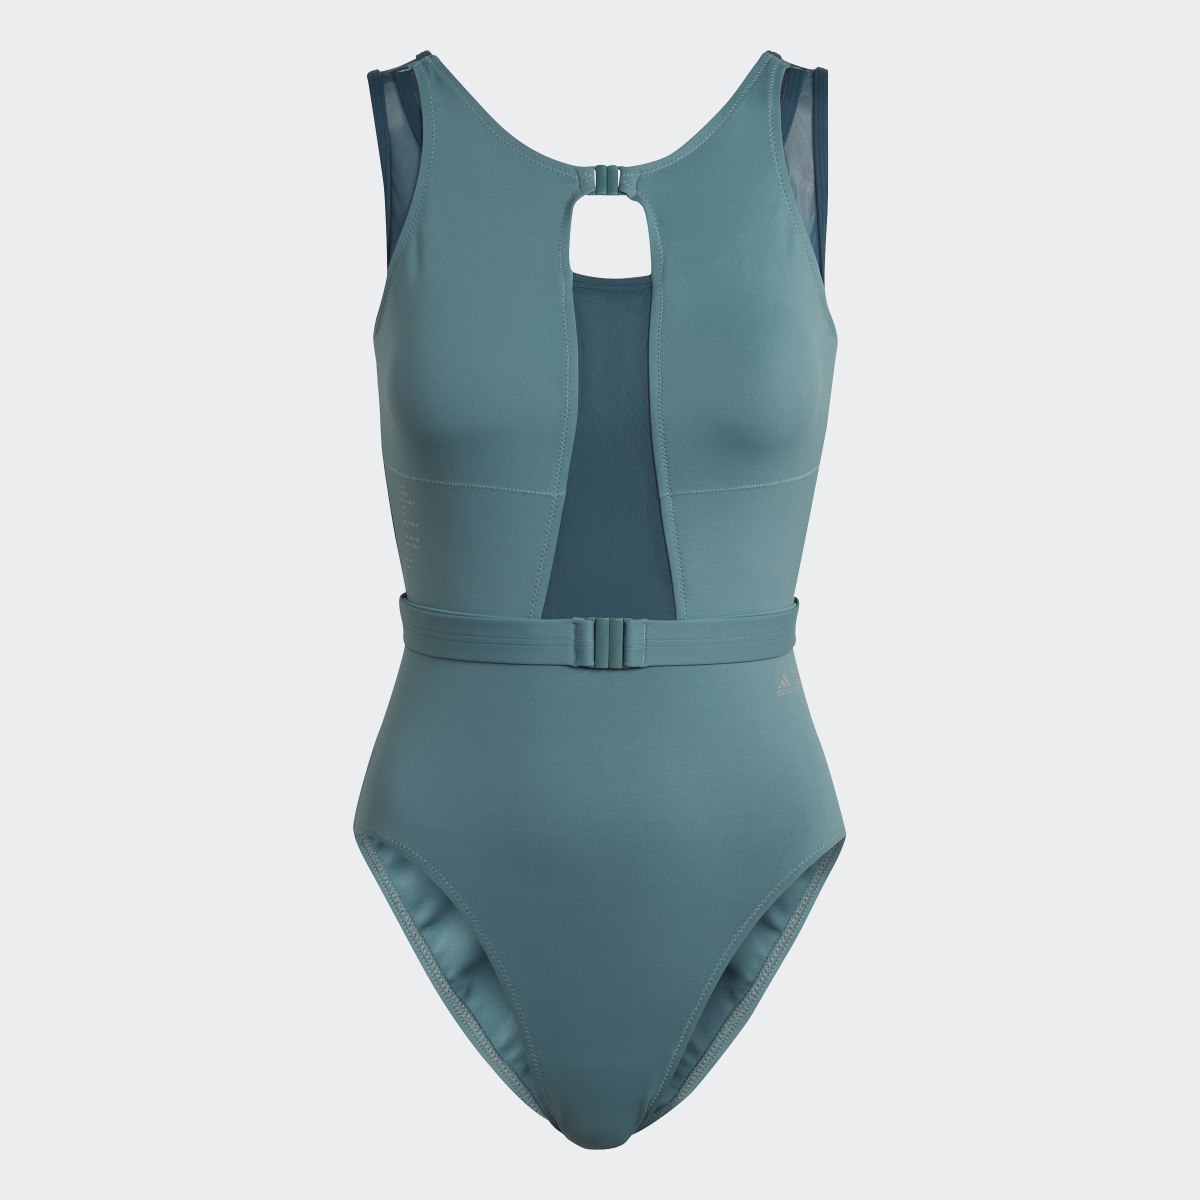 Adidas Parley Swimsuit. 5